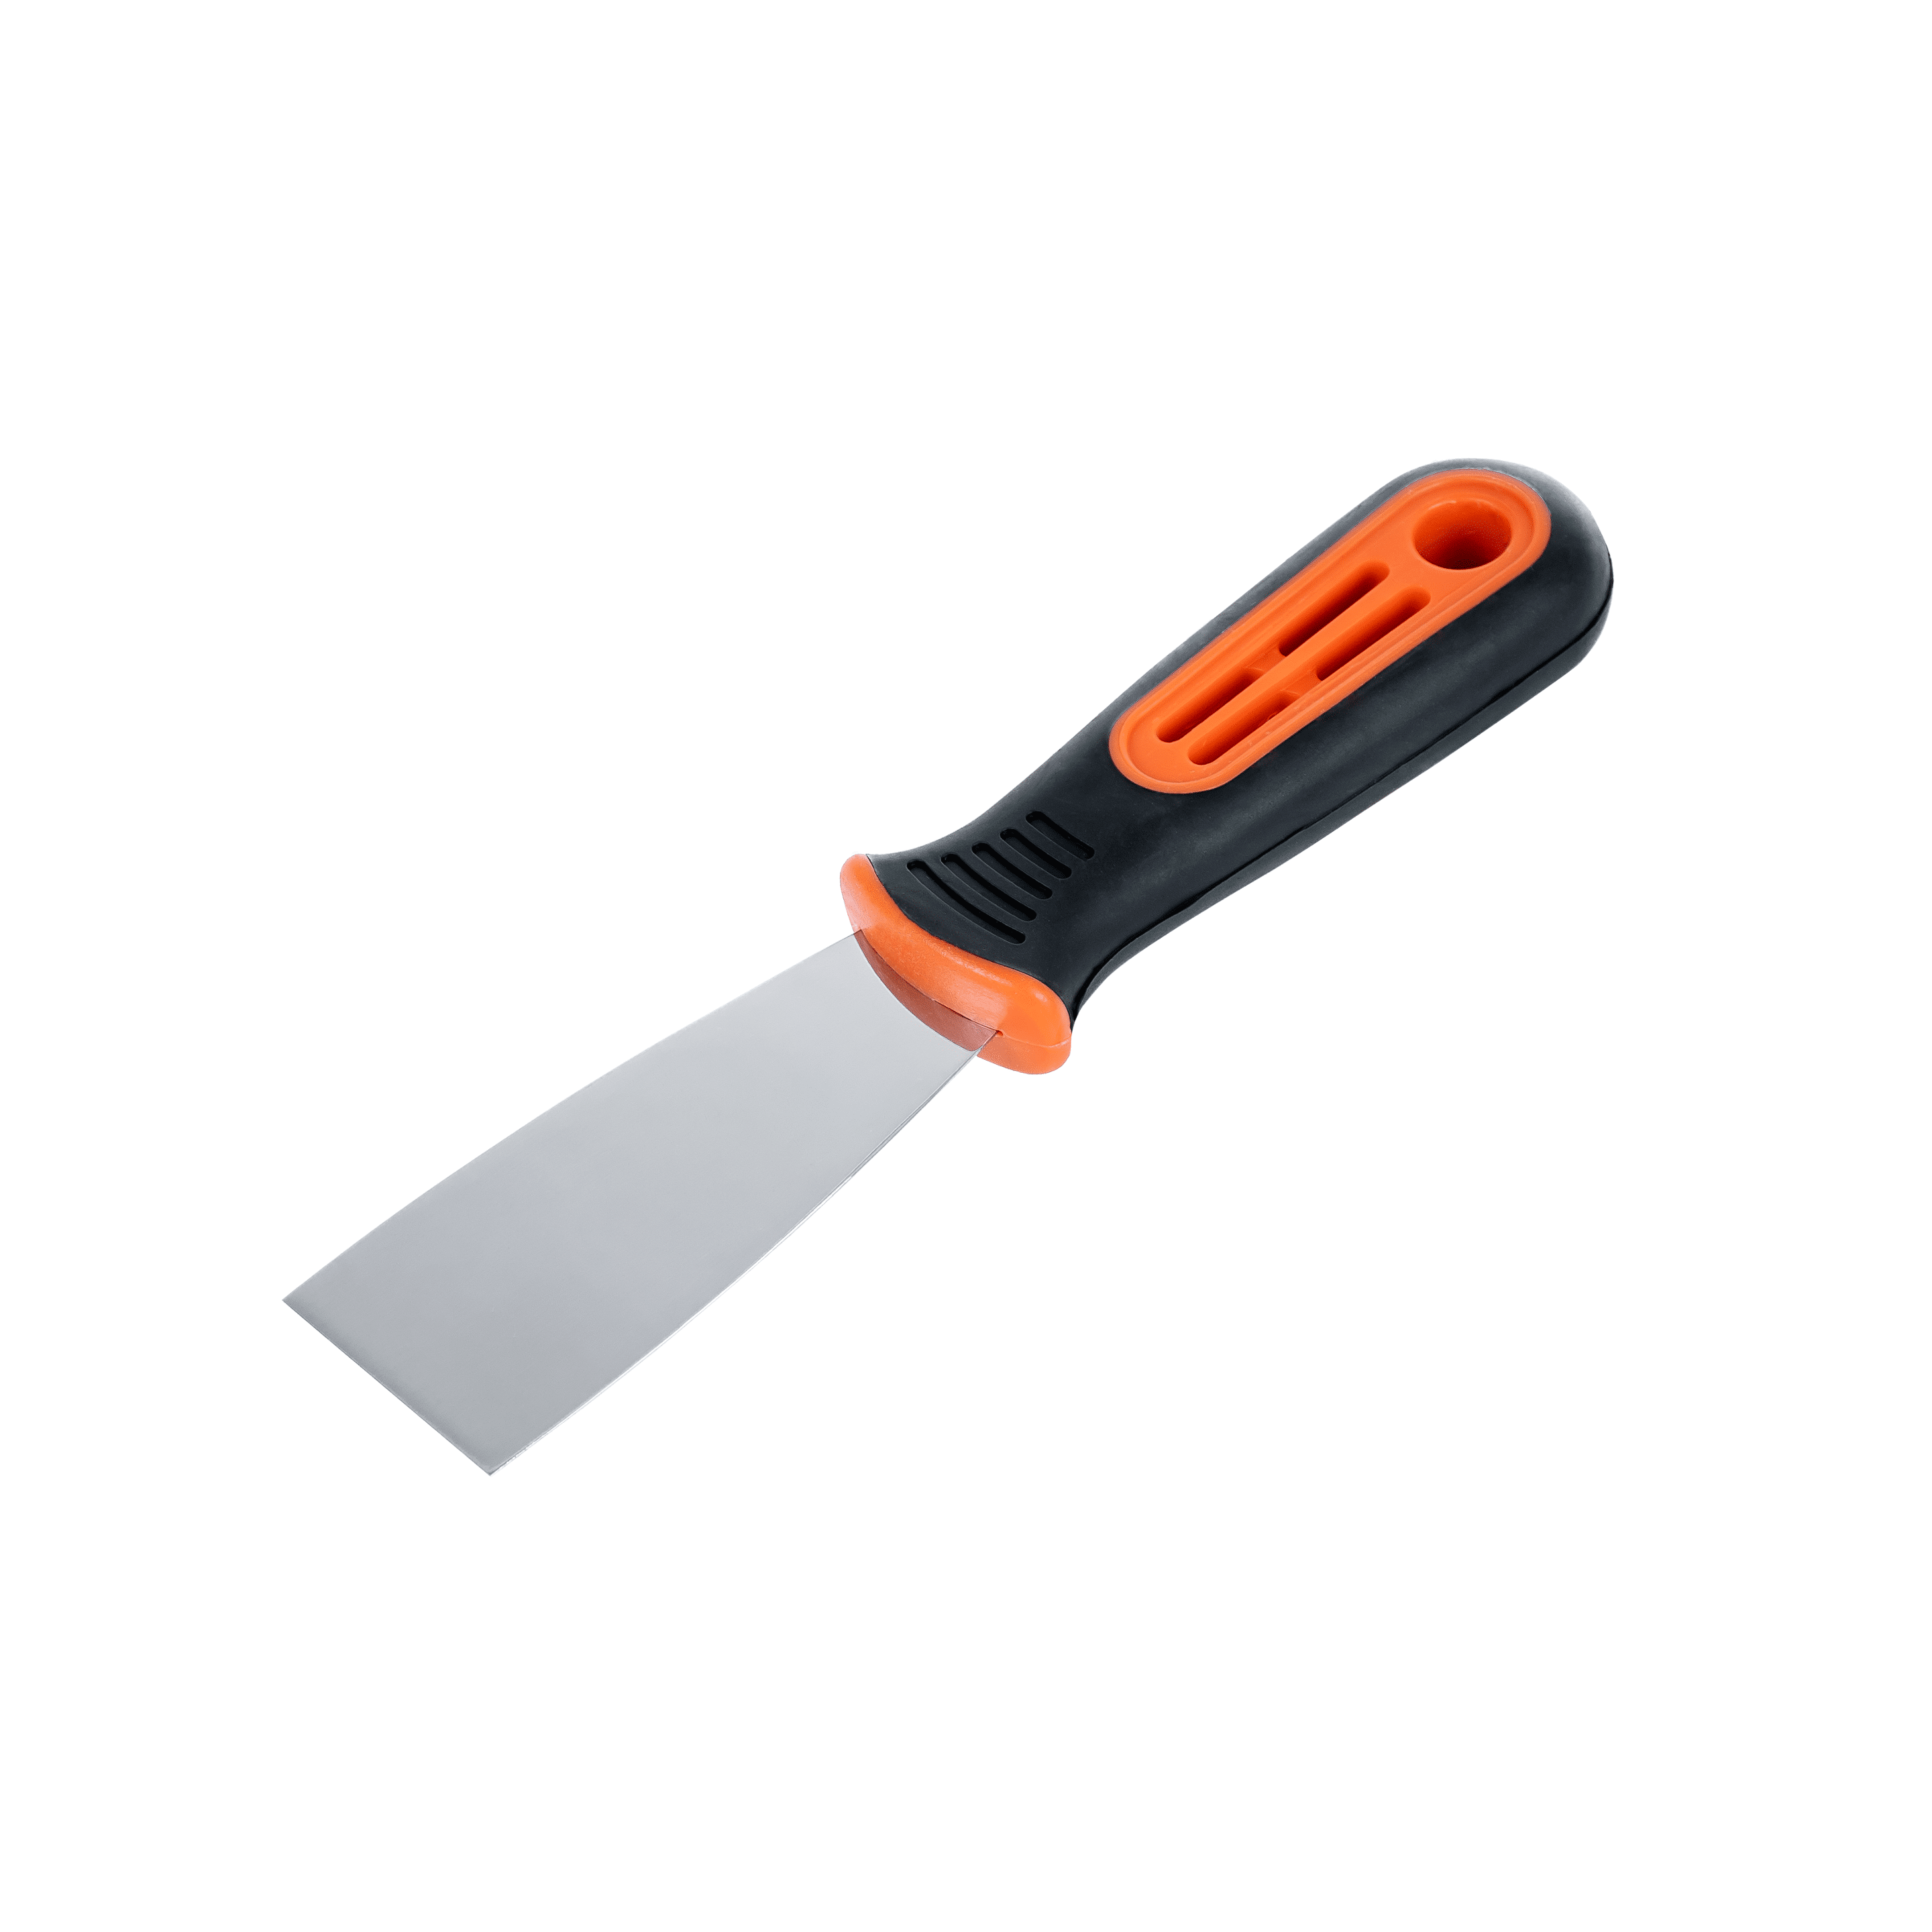 Putty knife, stainless steel,soft grip handle 40 mm